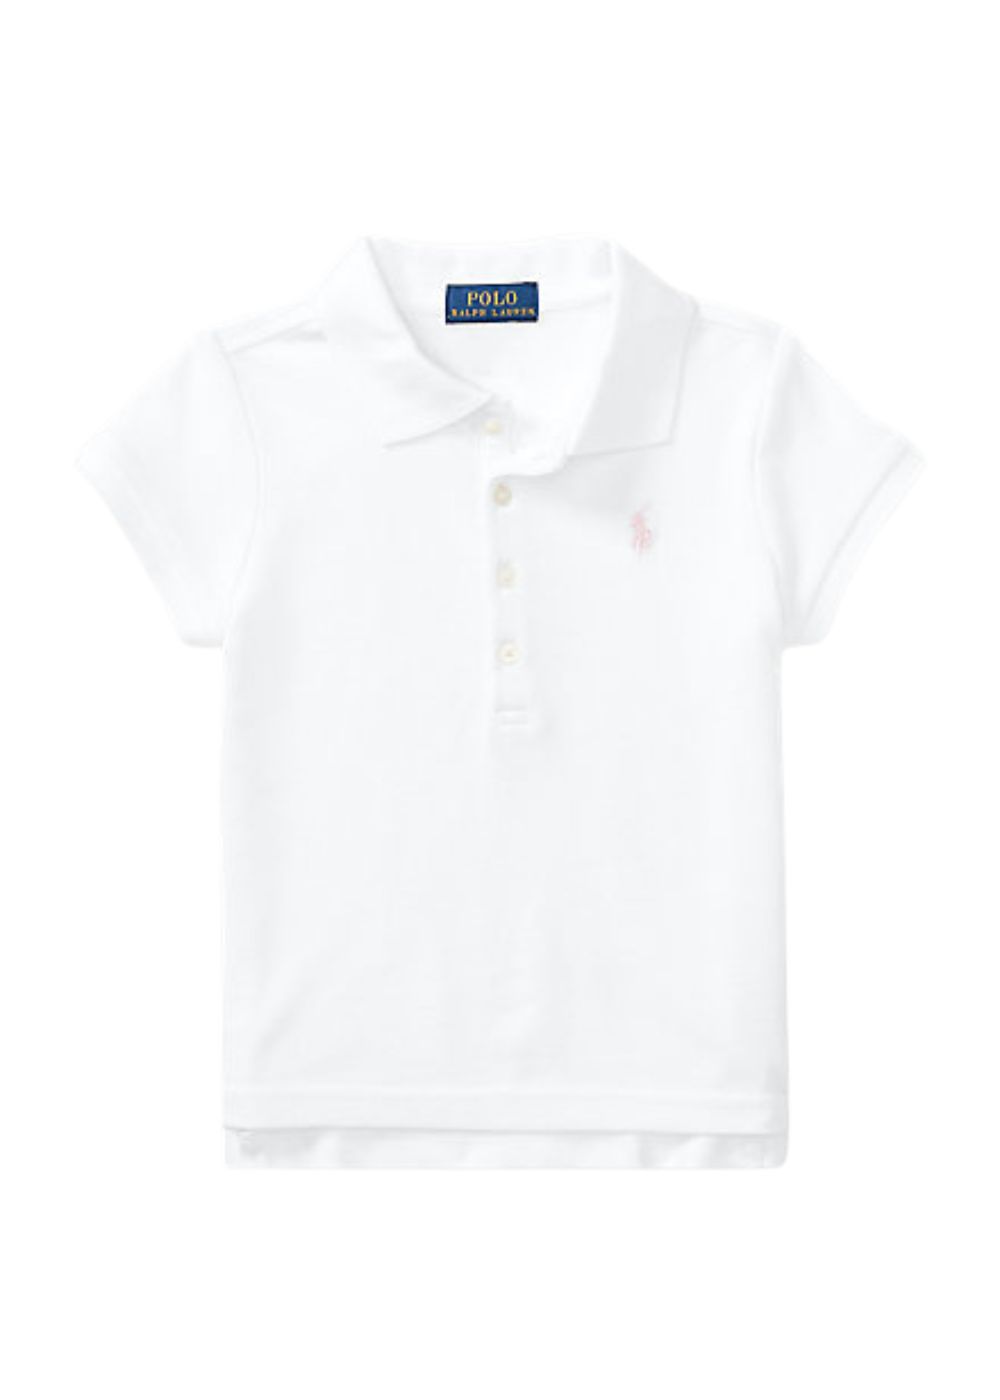 Featured image for “Polo Ralph Lauren Polo In Piquè Stretch”